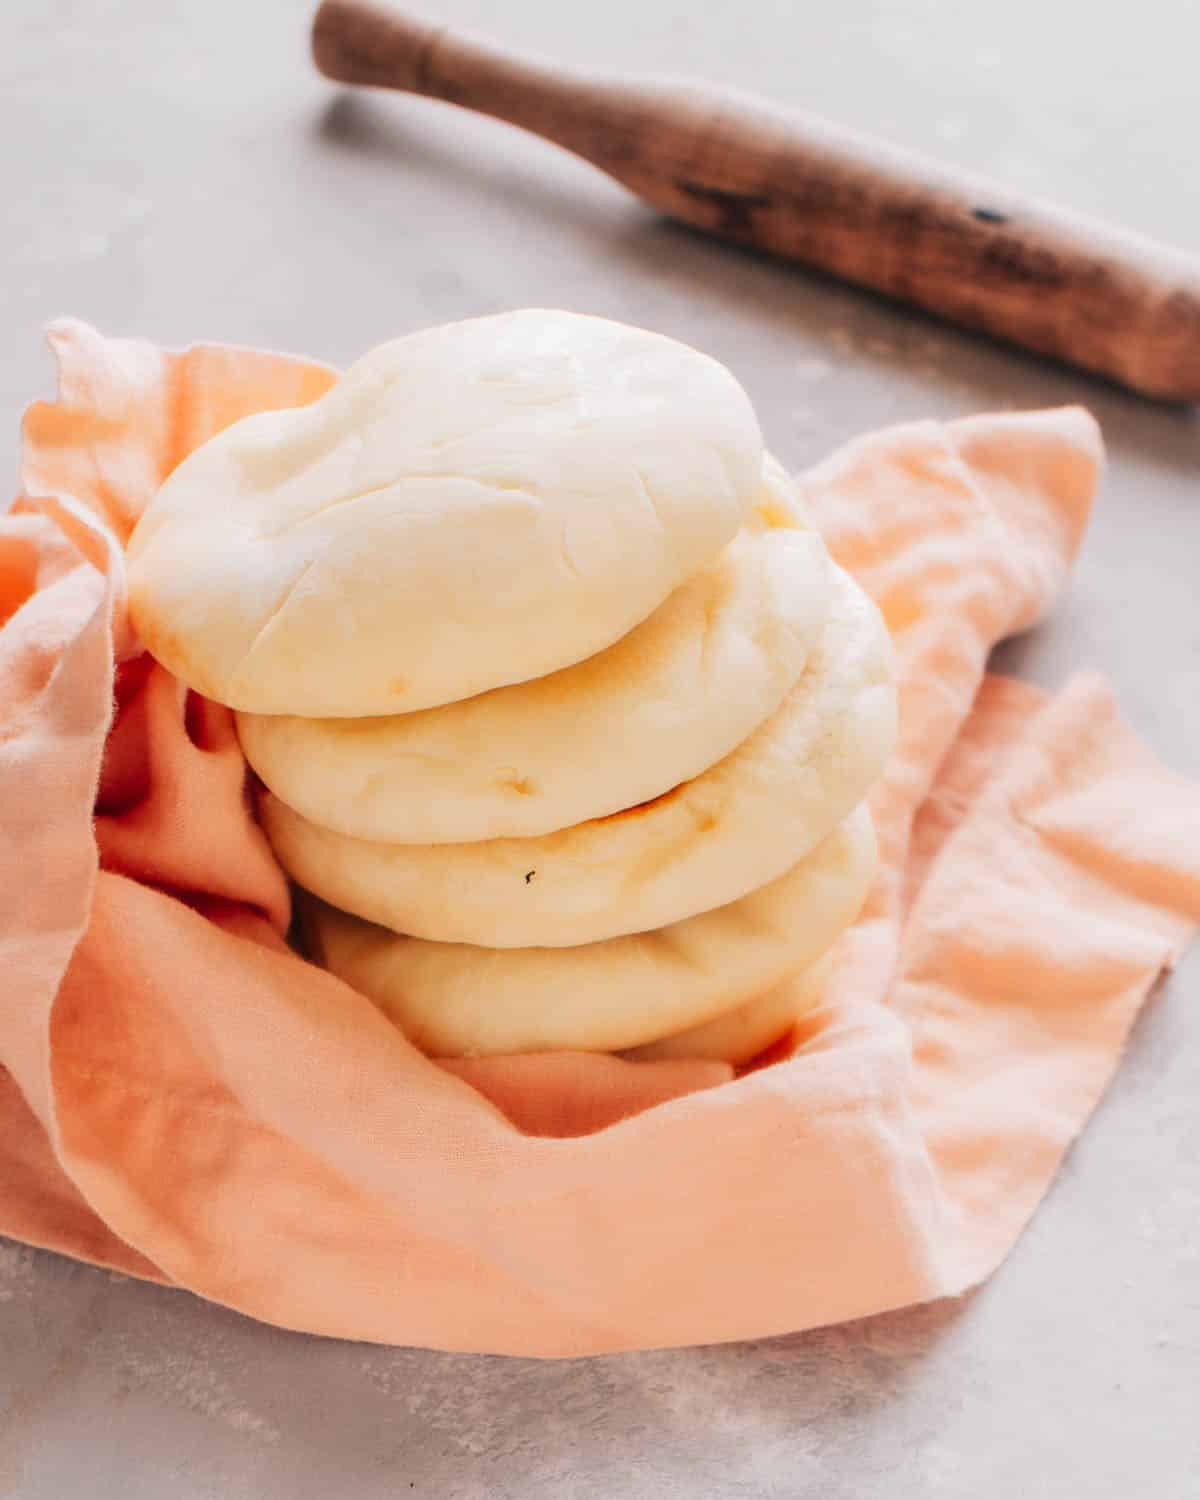 Stack of 4 Turkish breads (bazlama) on a kitchen cloth, with a rolling pin in the background.